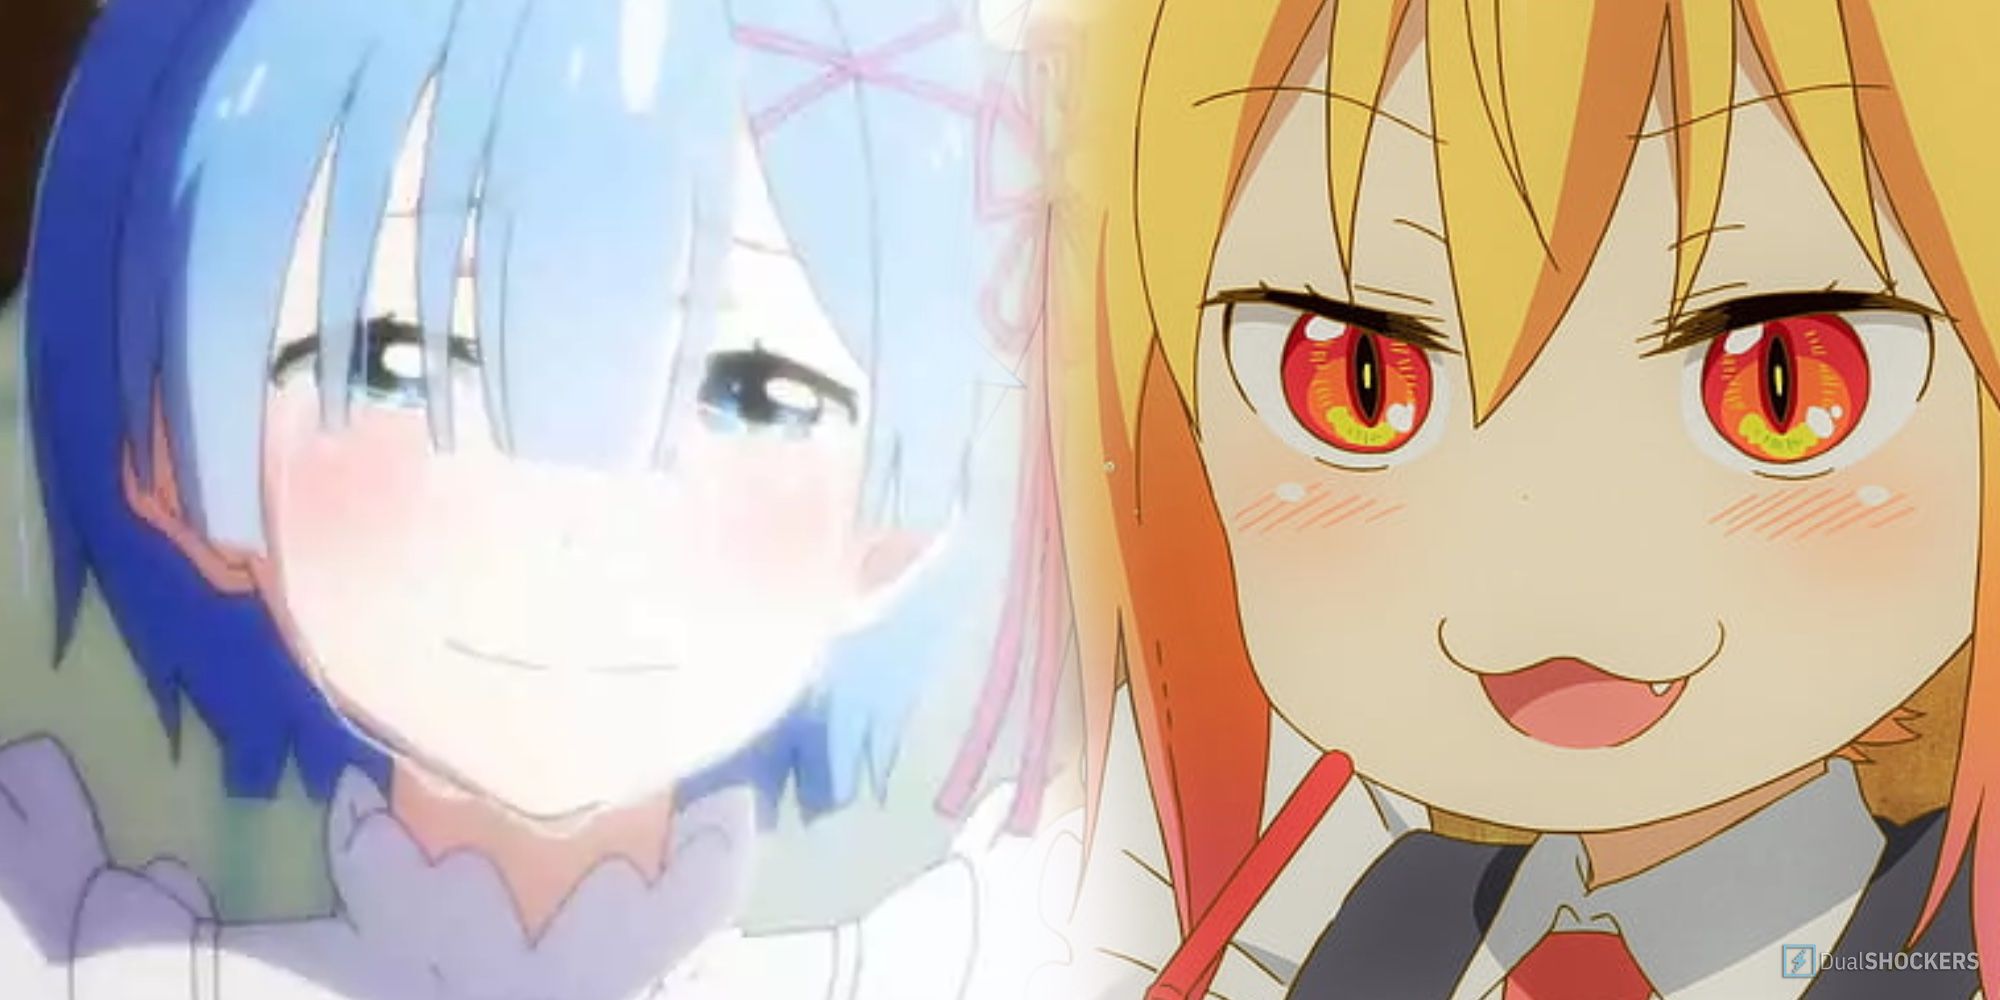 Best Maids in Anime, Rem and Tohru